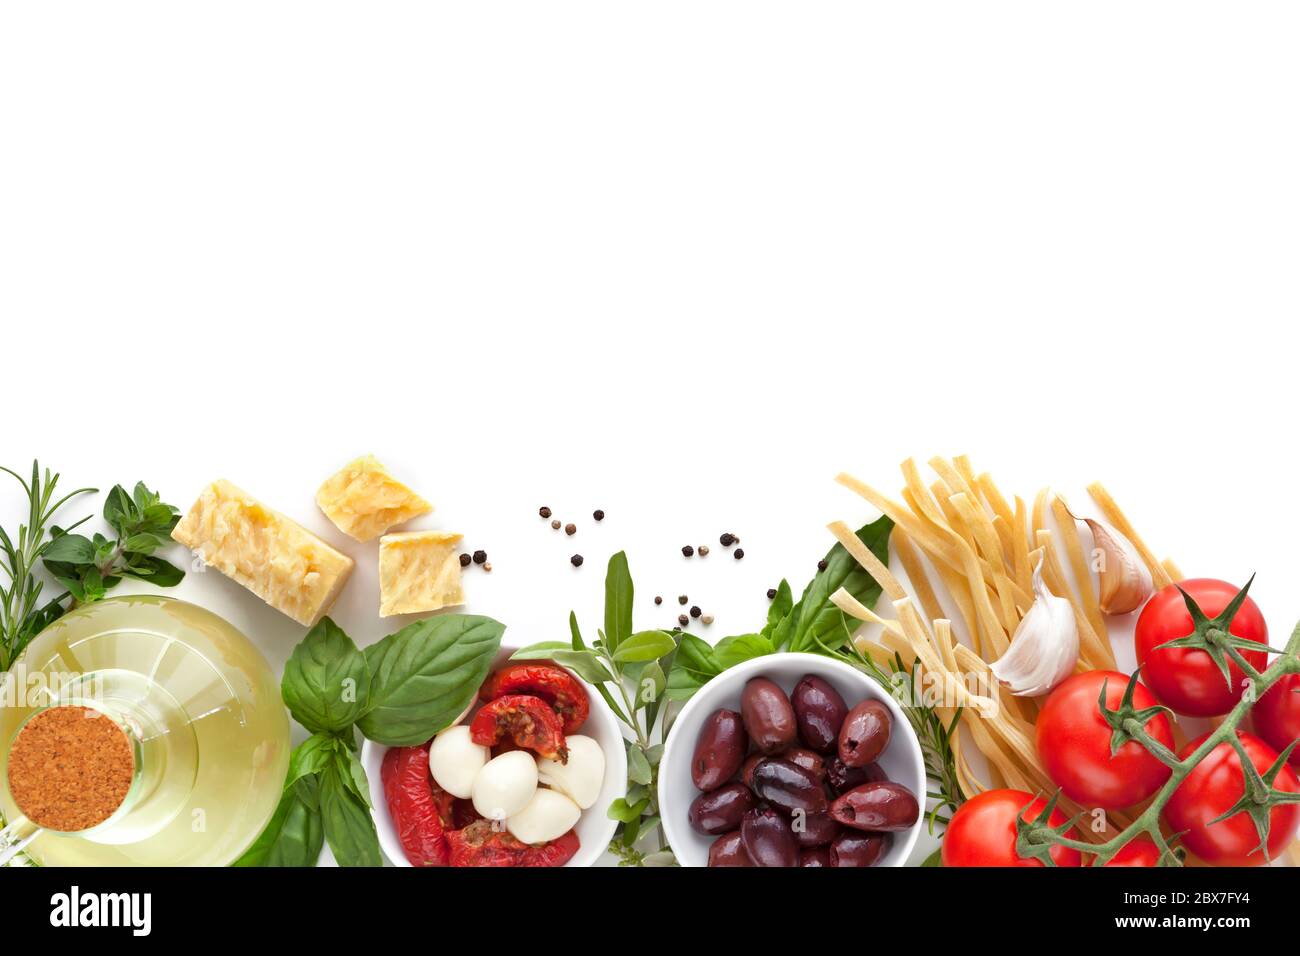 Italian food background over white.  Variety of ingredients, including olive oil, pasta, tomatoes, olives, herbs, parmesan and mozzarella. Stock Photo